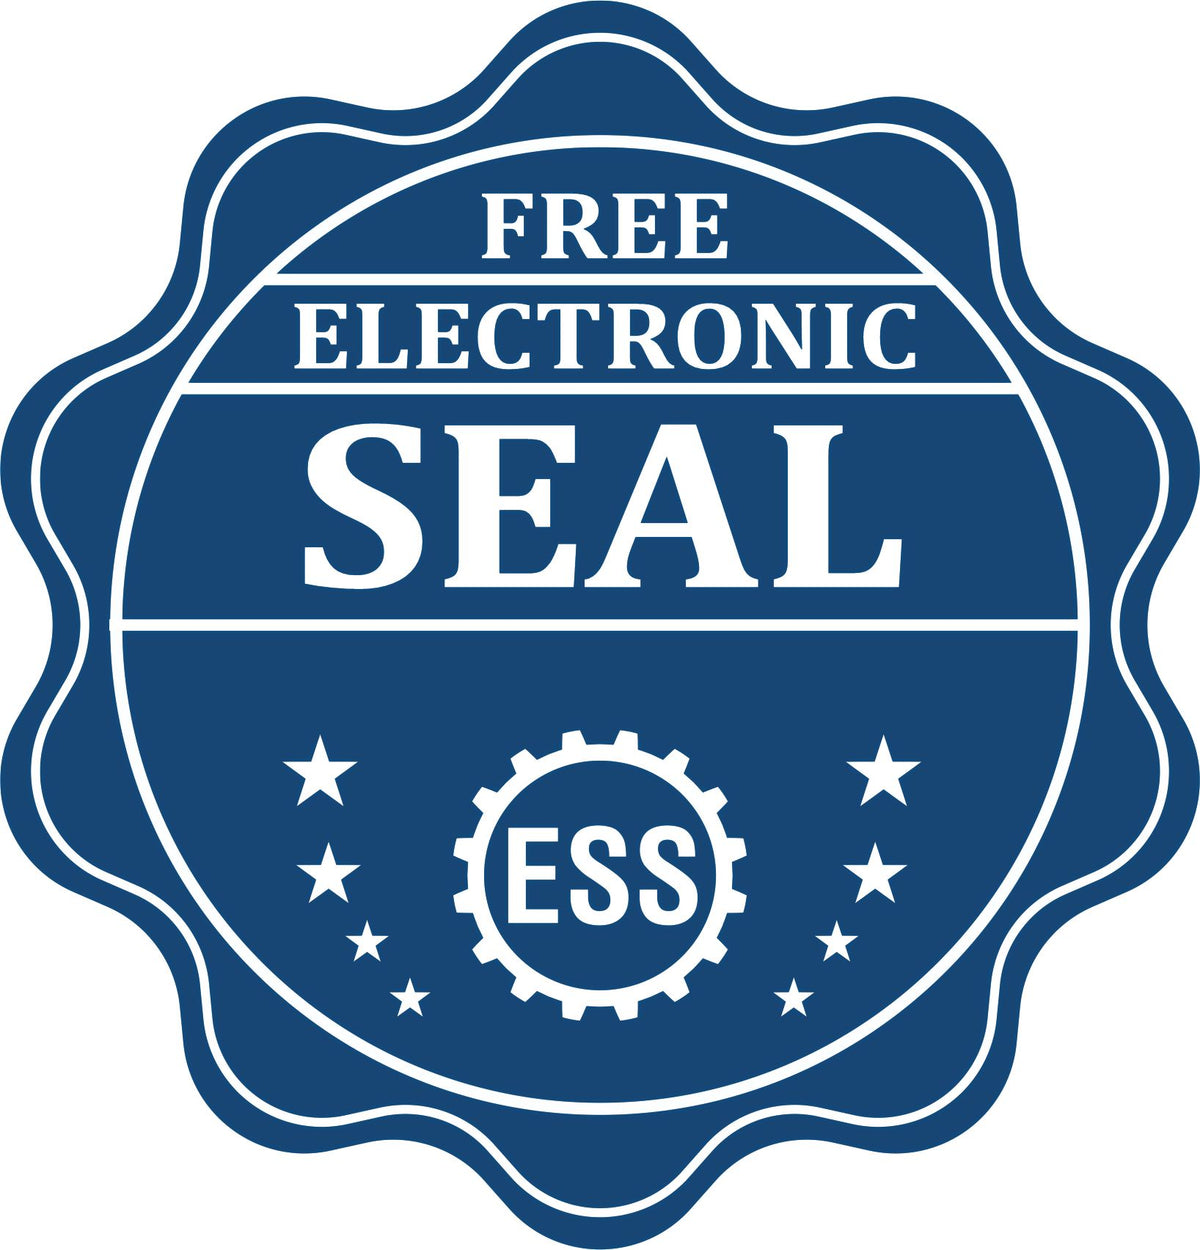 A badge showing a free electronic seal for the Long Reach Vermont Geology Seal with stars and the ESS gear on the emblem.